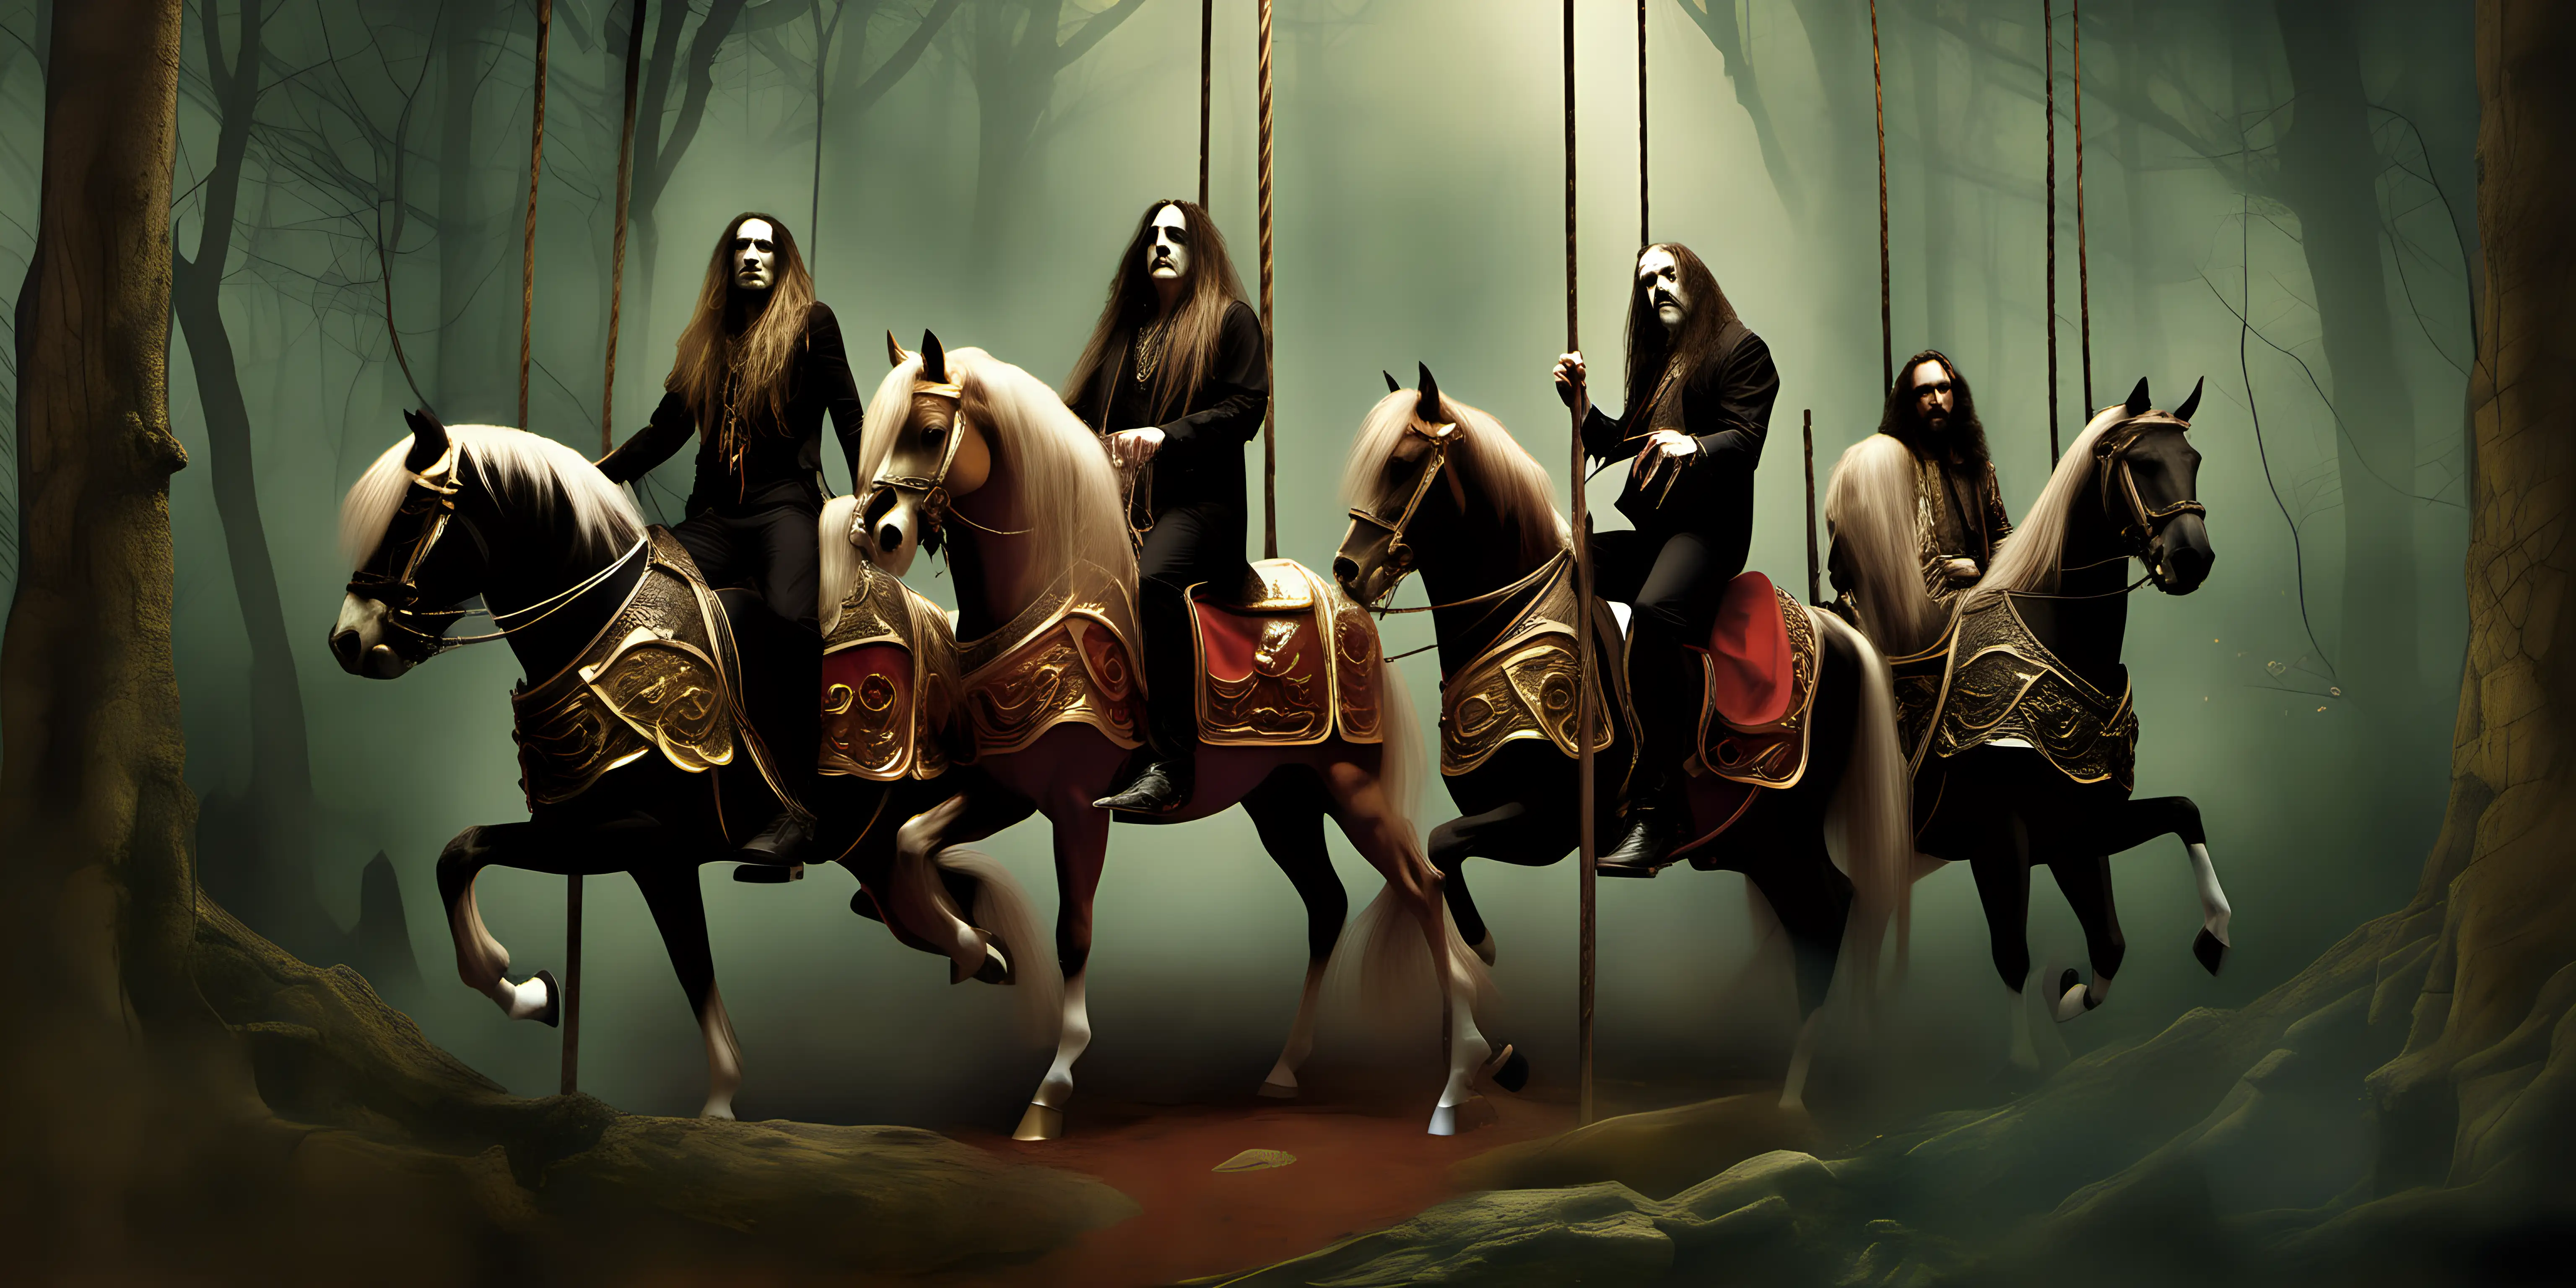 Pagan Rock Band Riding Circus Carousel in Ancient Forest